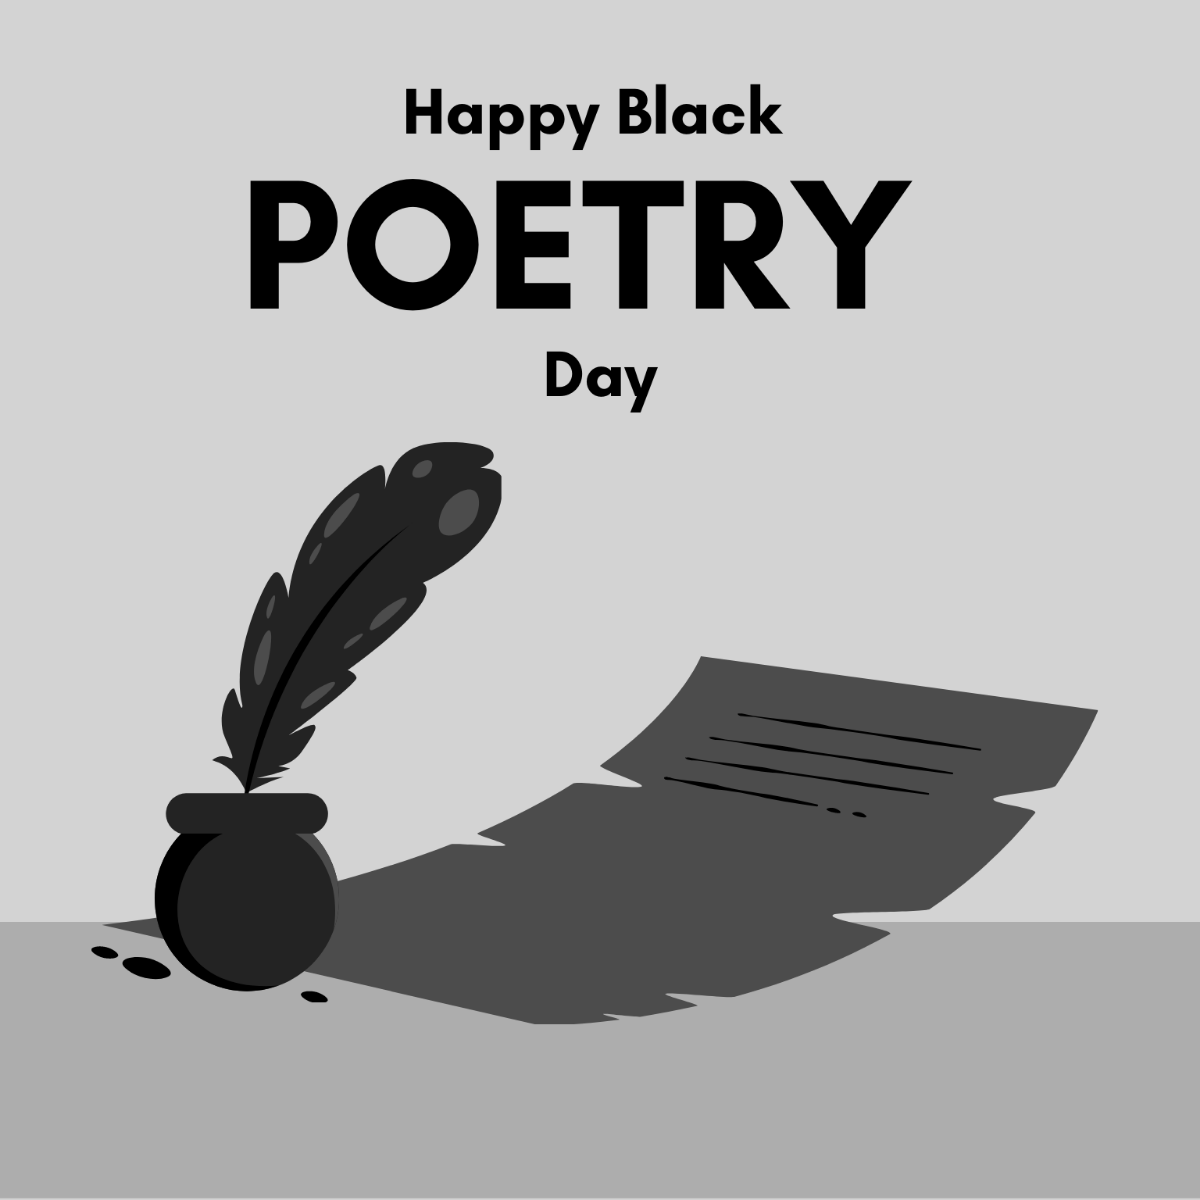 Happy Black Poetry Day Illustration Template